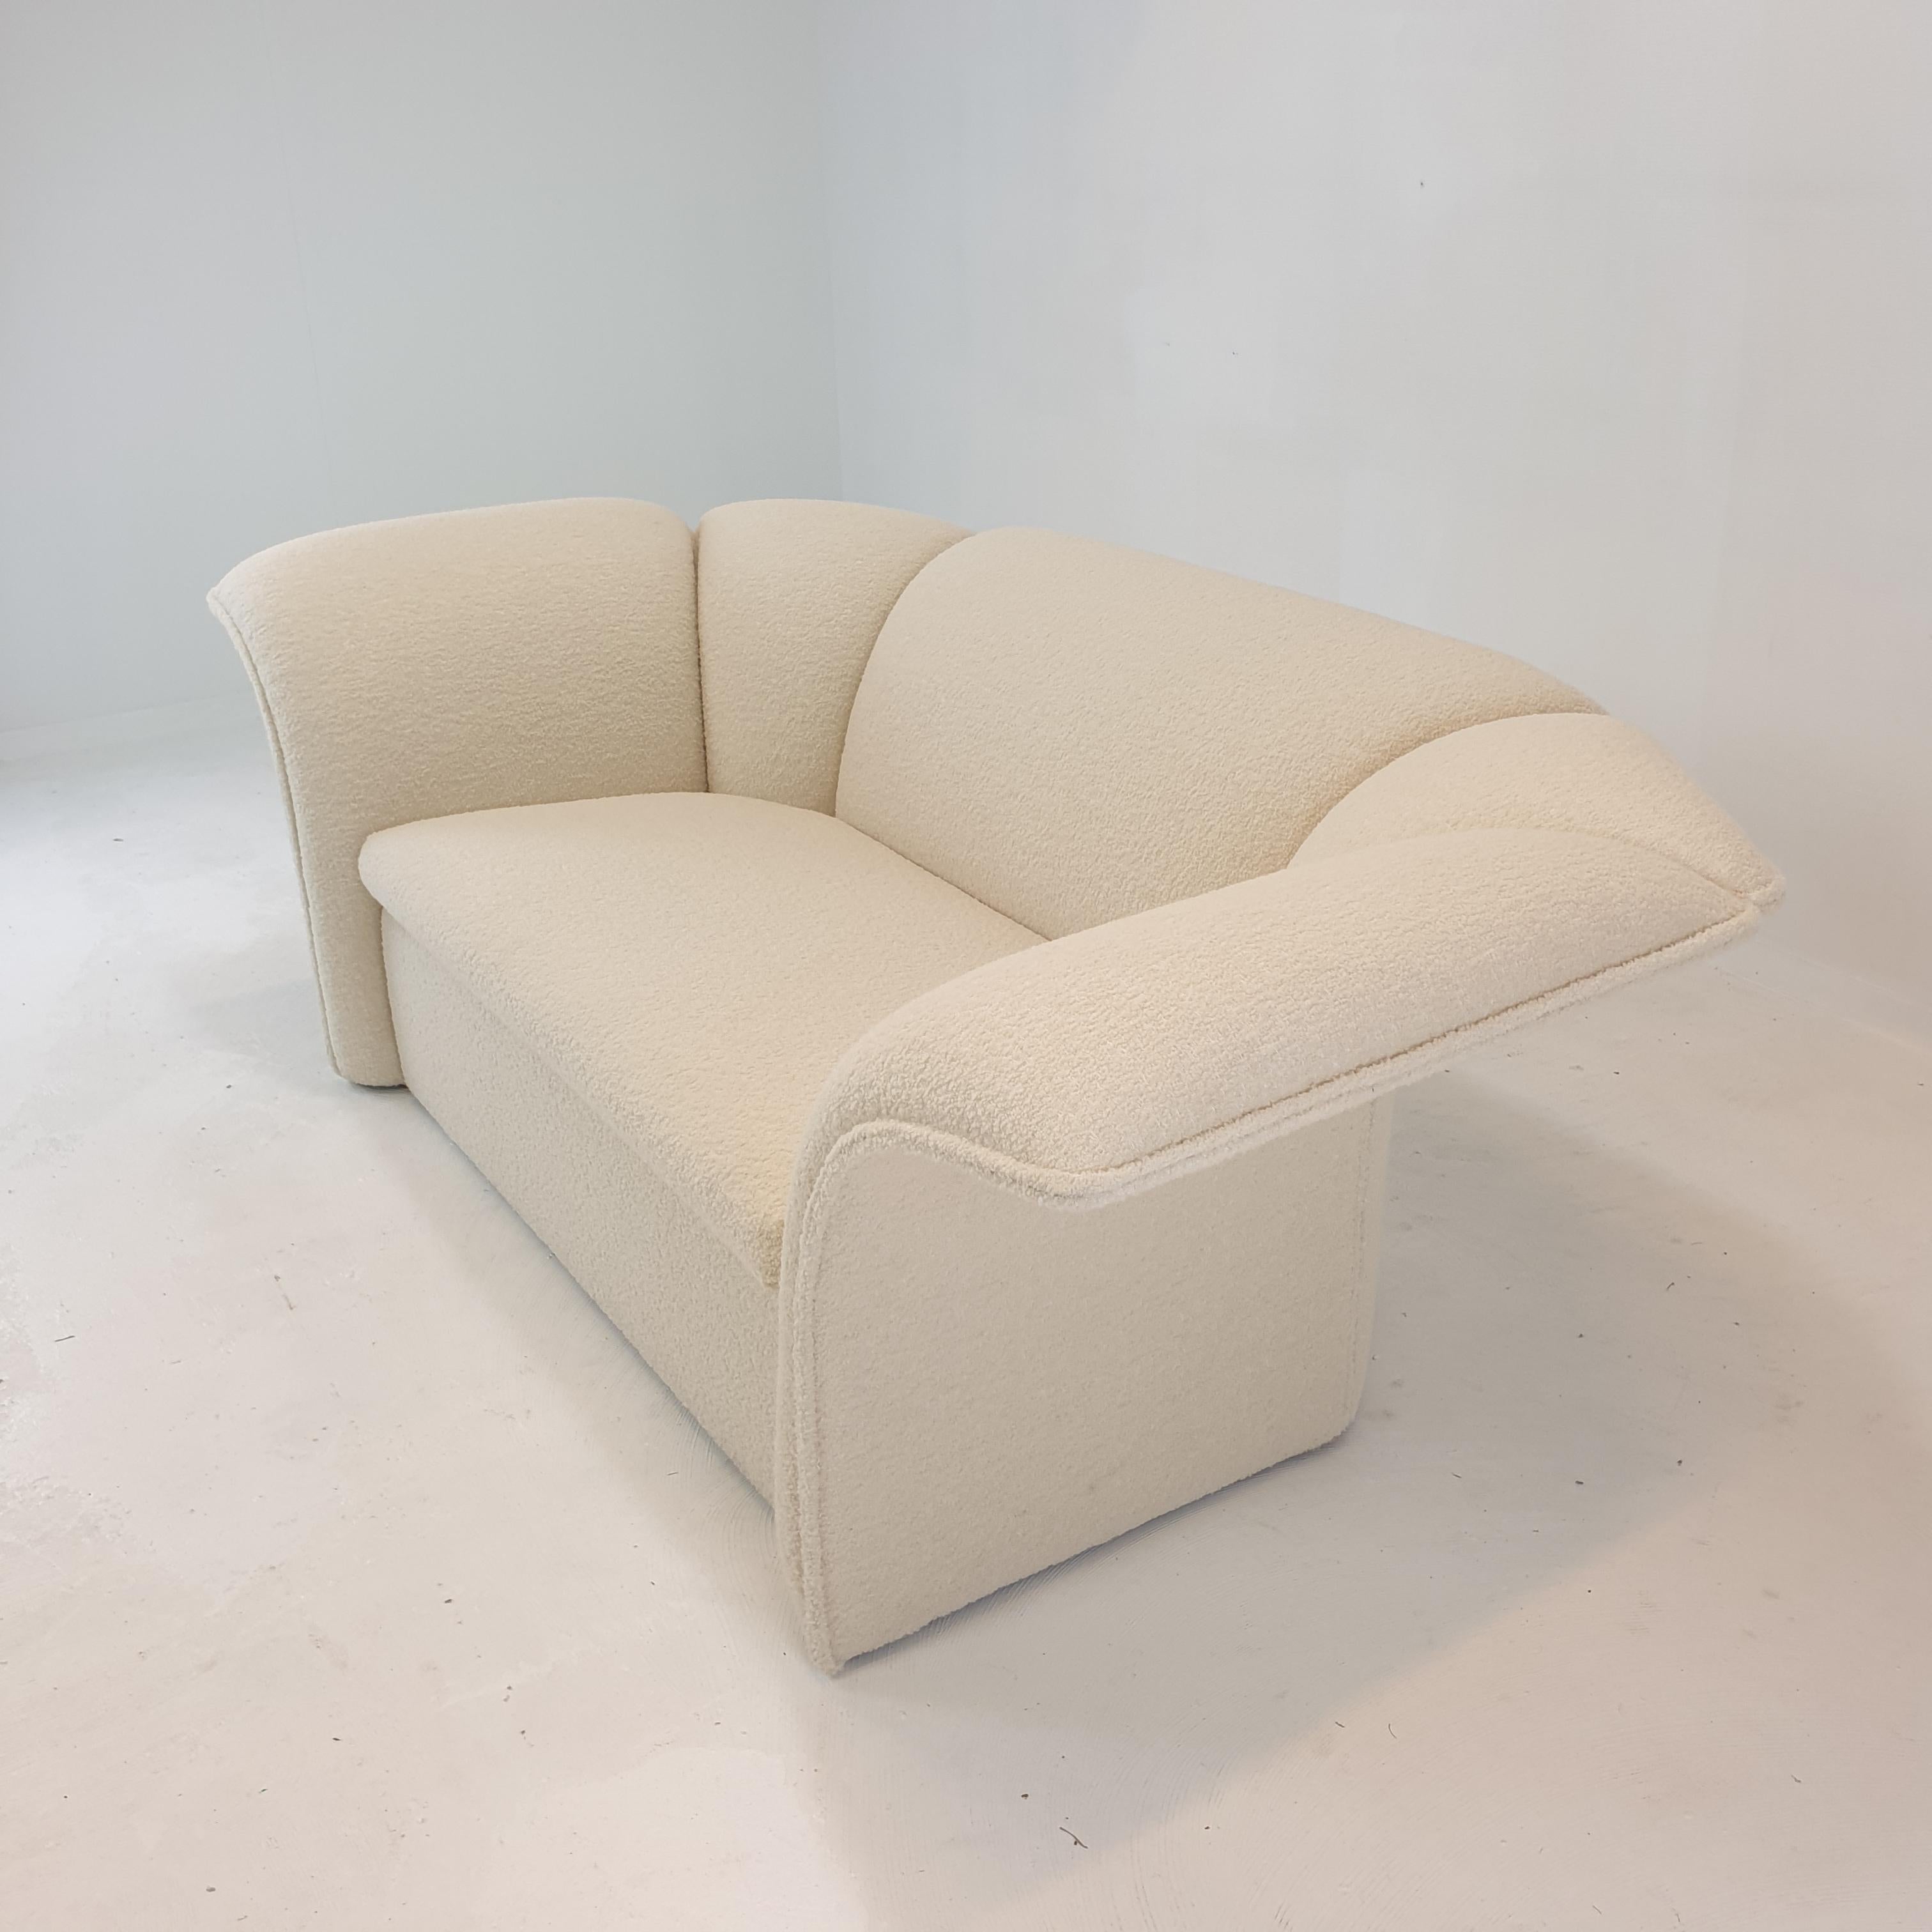 2-Seat Sofa by Artifort, 1970's For Sale 2